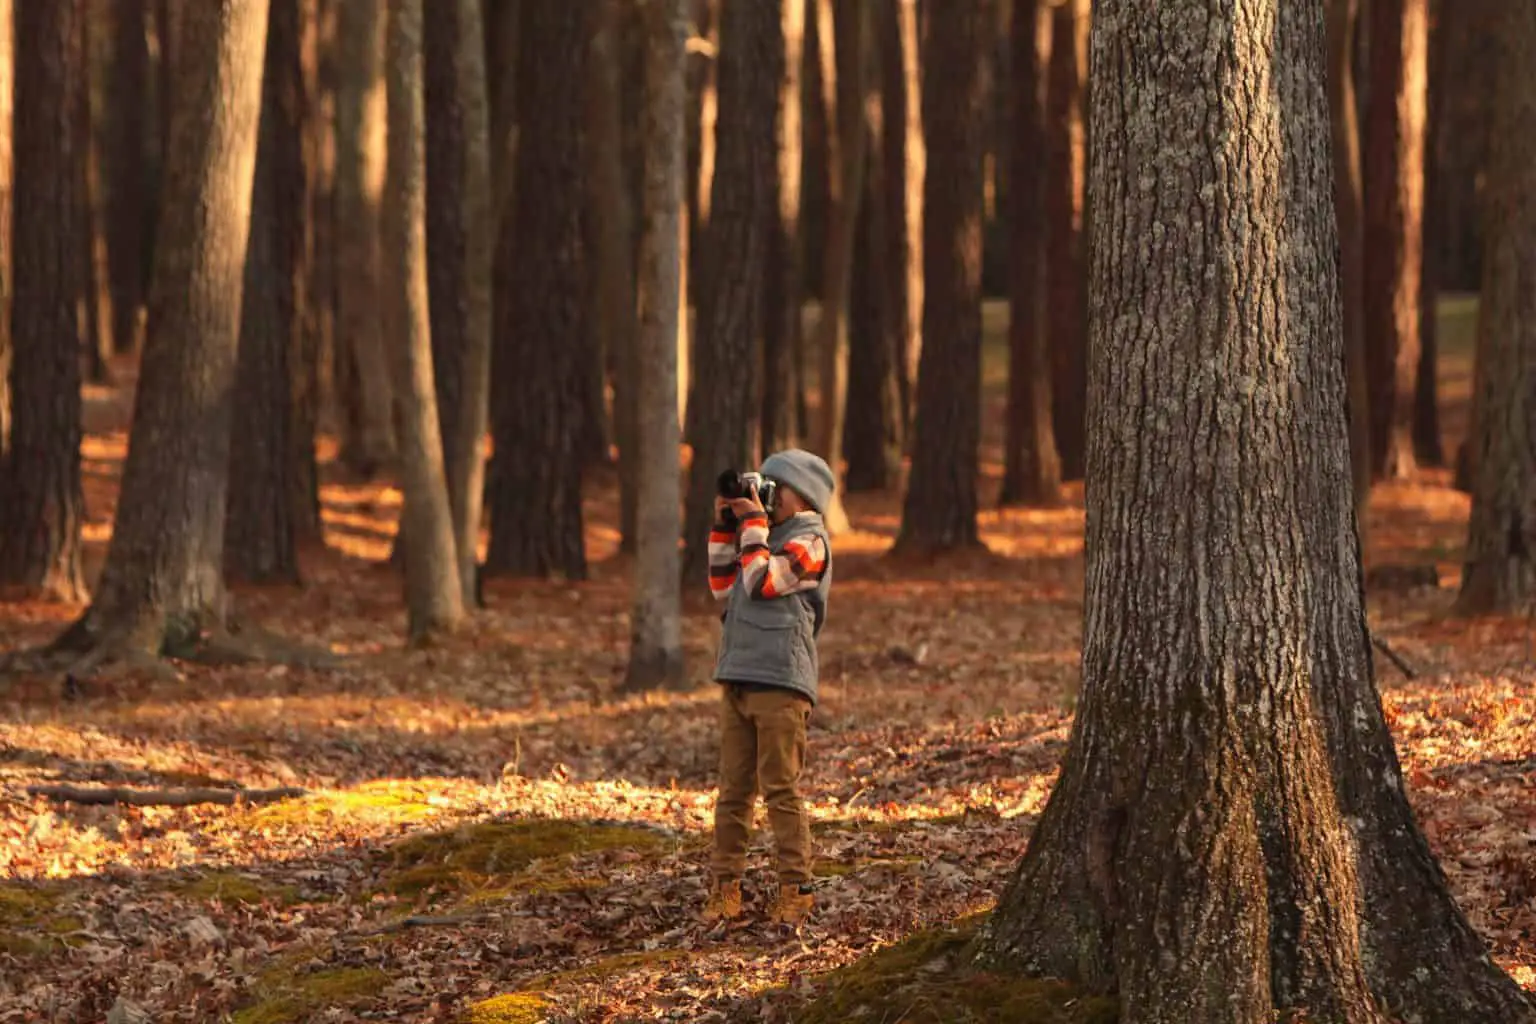 A kid taking photos in a forest with a camera